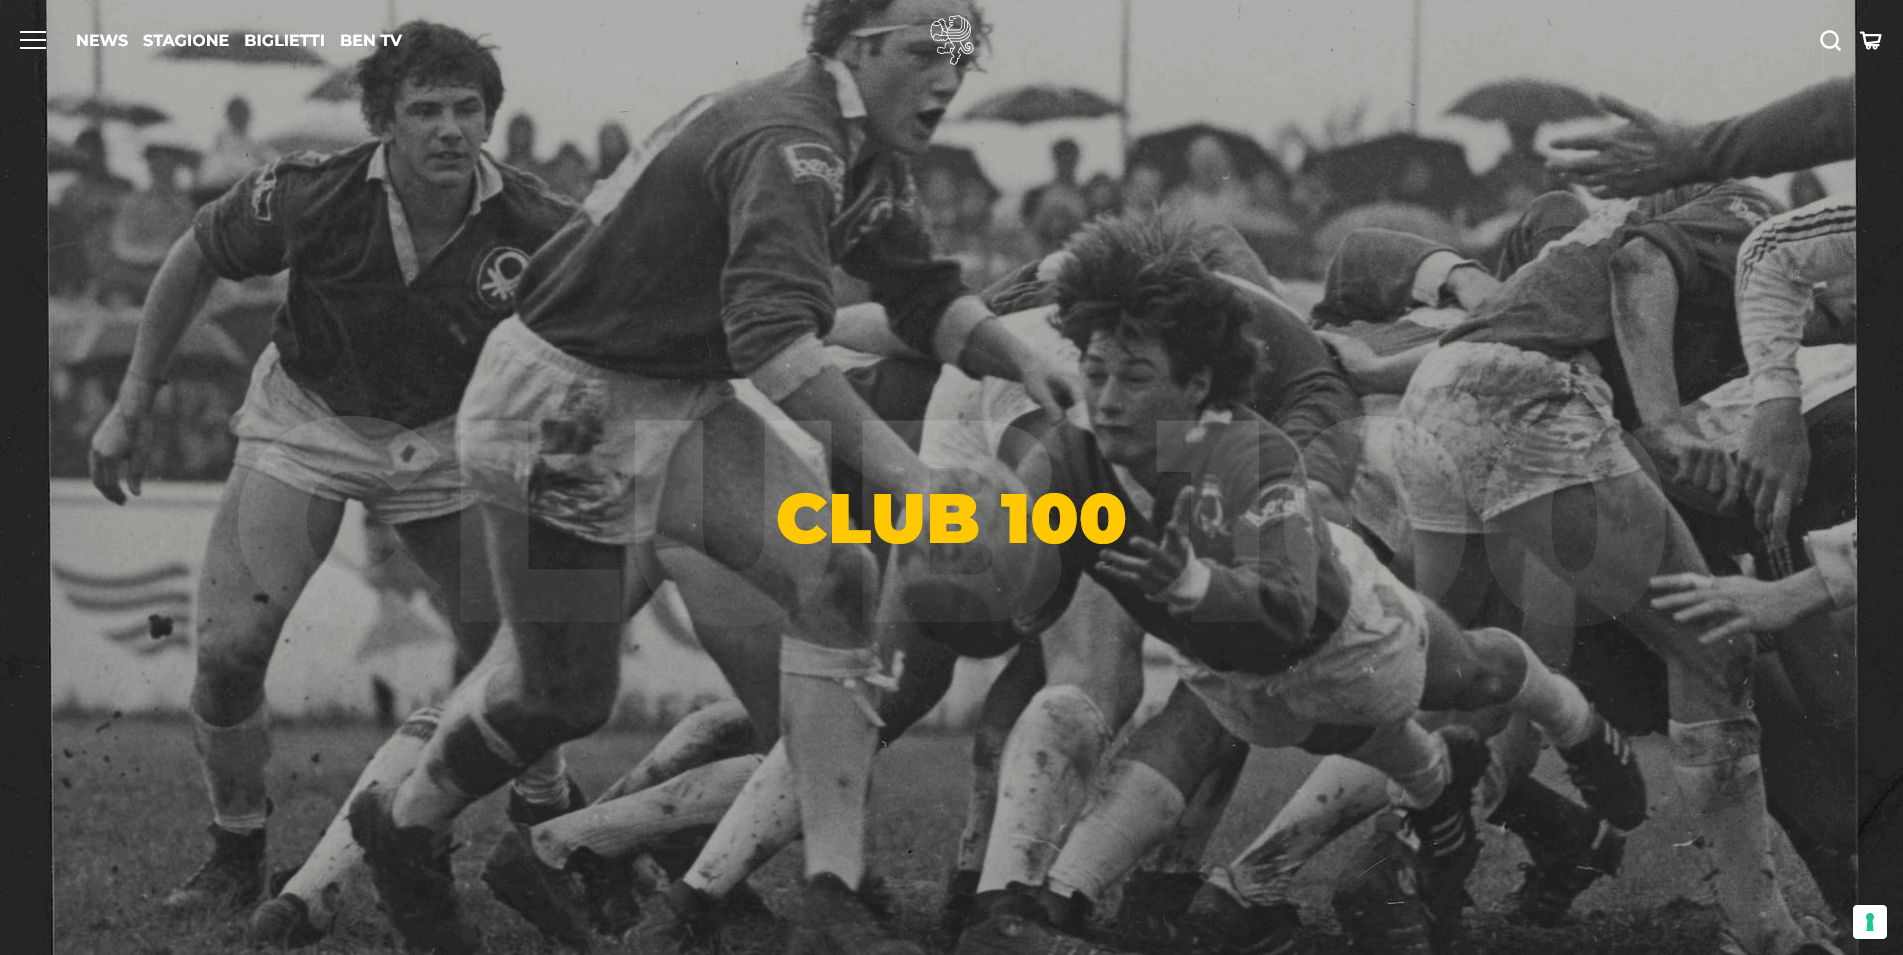 Benetton Rugby Club 100